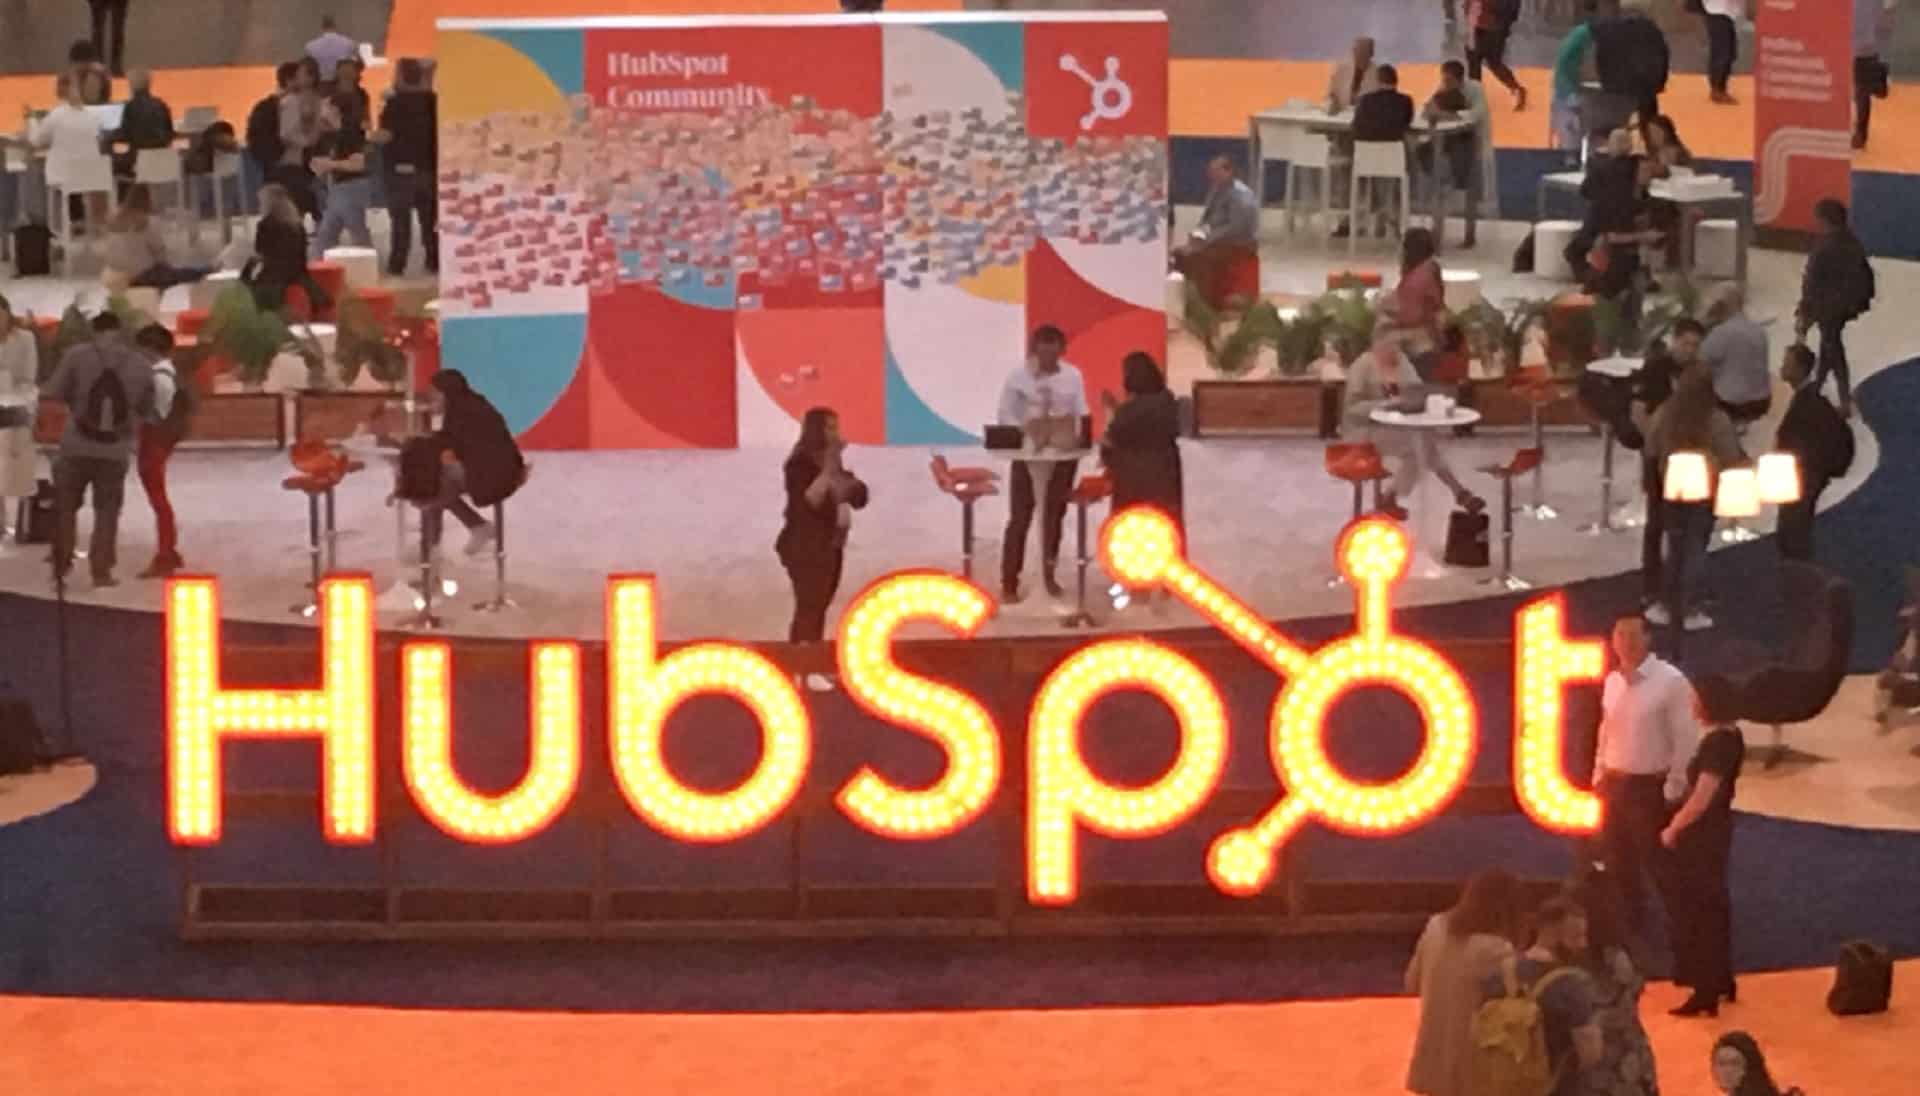 HubSpot pairs community with a connected platform